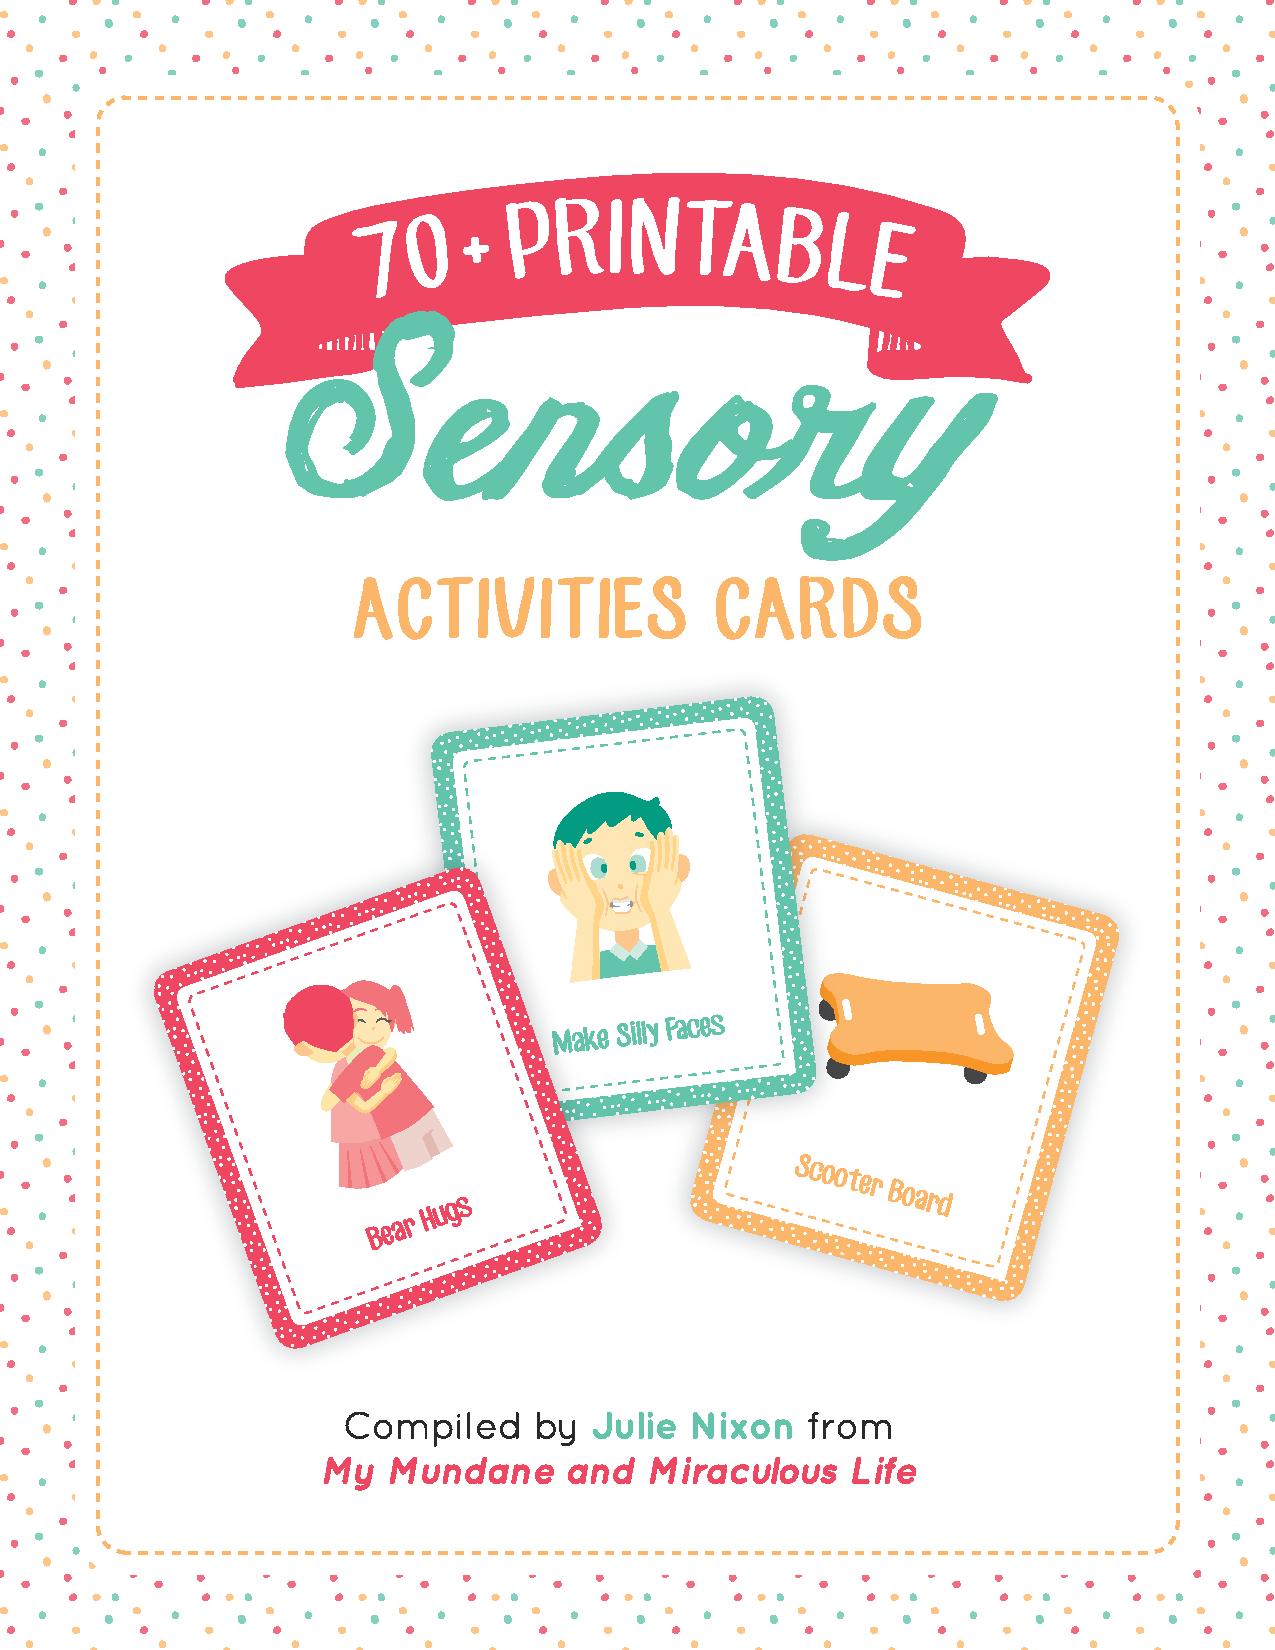 70+ Printable Sensory Activities Cards (Personal Use Only) » My Mundane